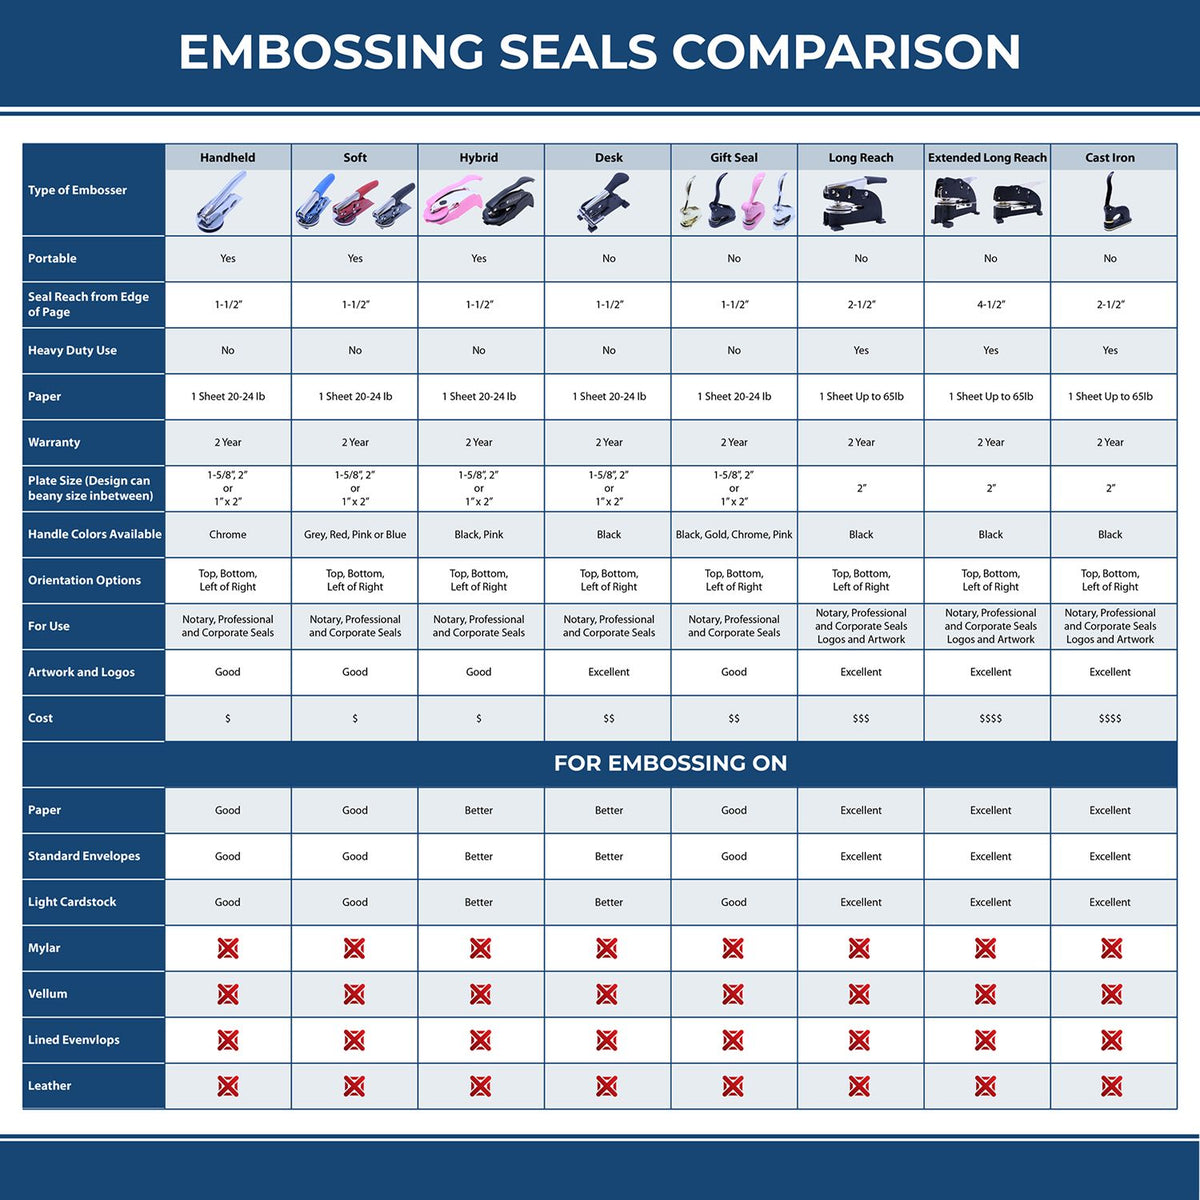 A comparison chart for the different types of mount models available for the Extended Long Reach New York Architect Seal Embosser.